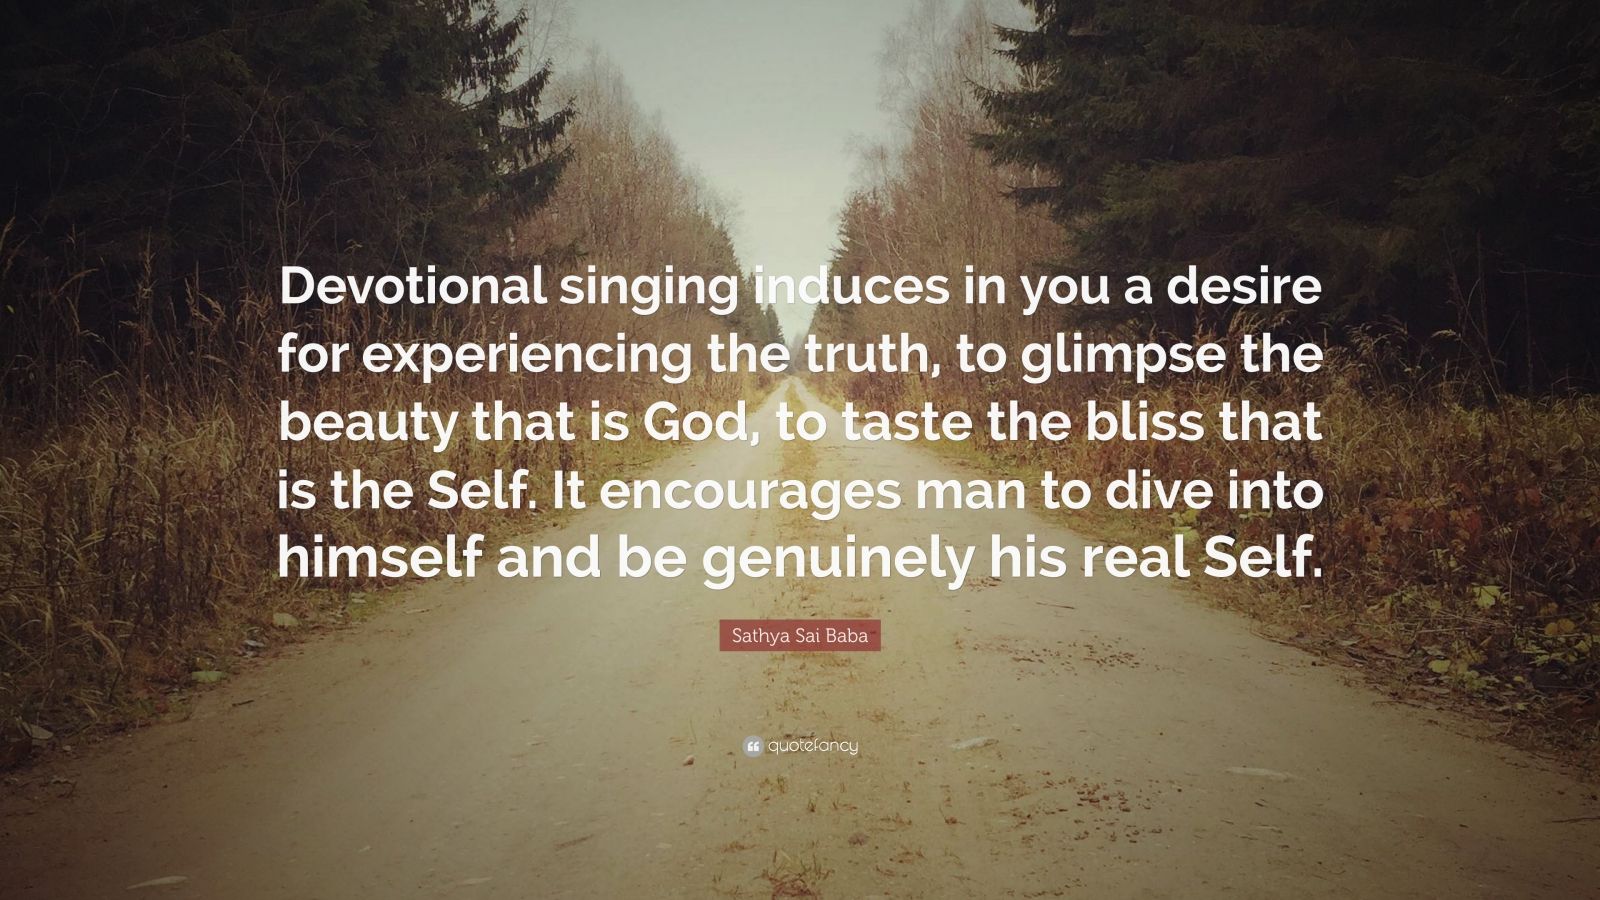 Sathya Sai Baba Quote: "Devotional singing induces in you ...